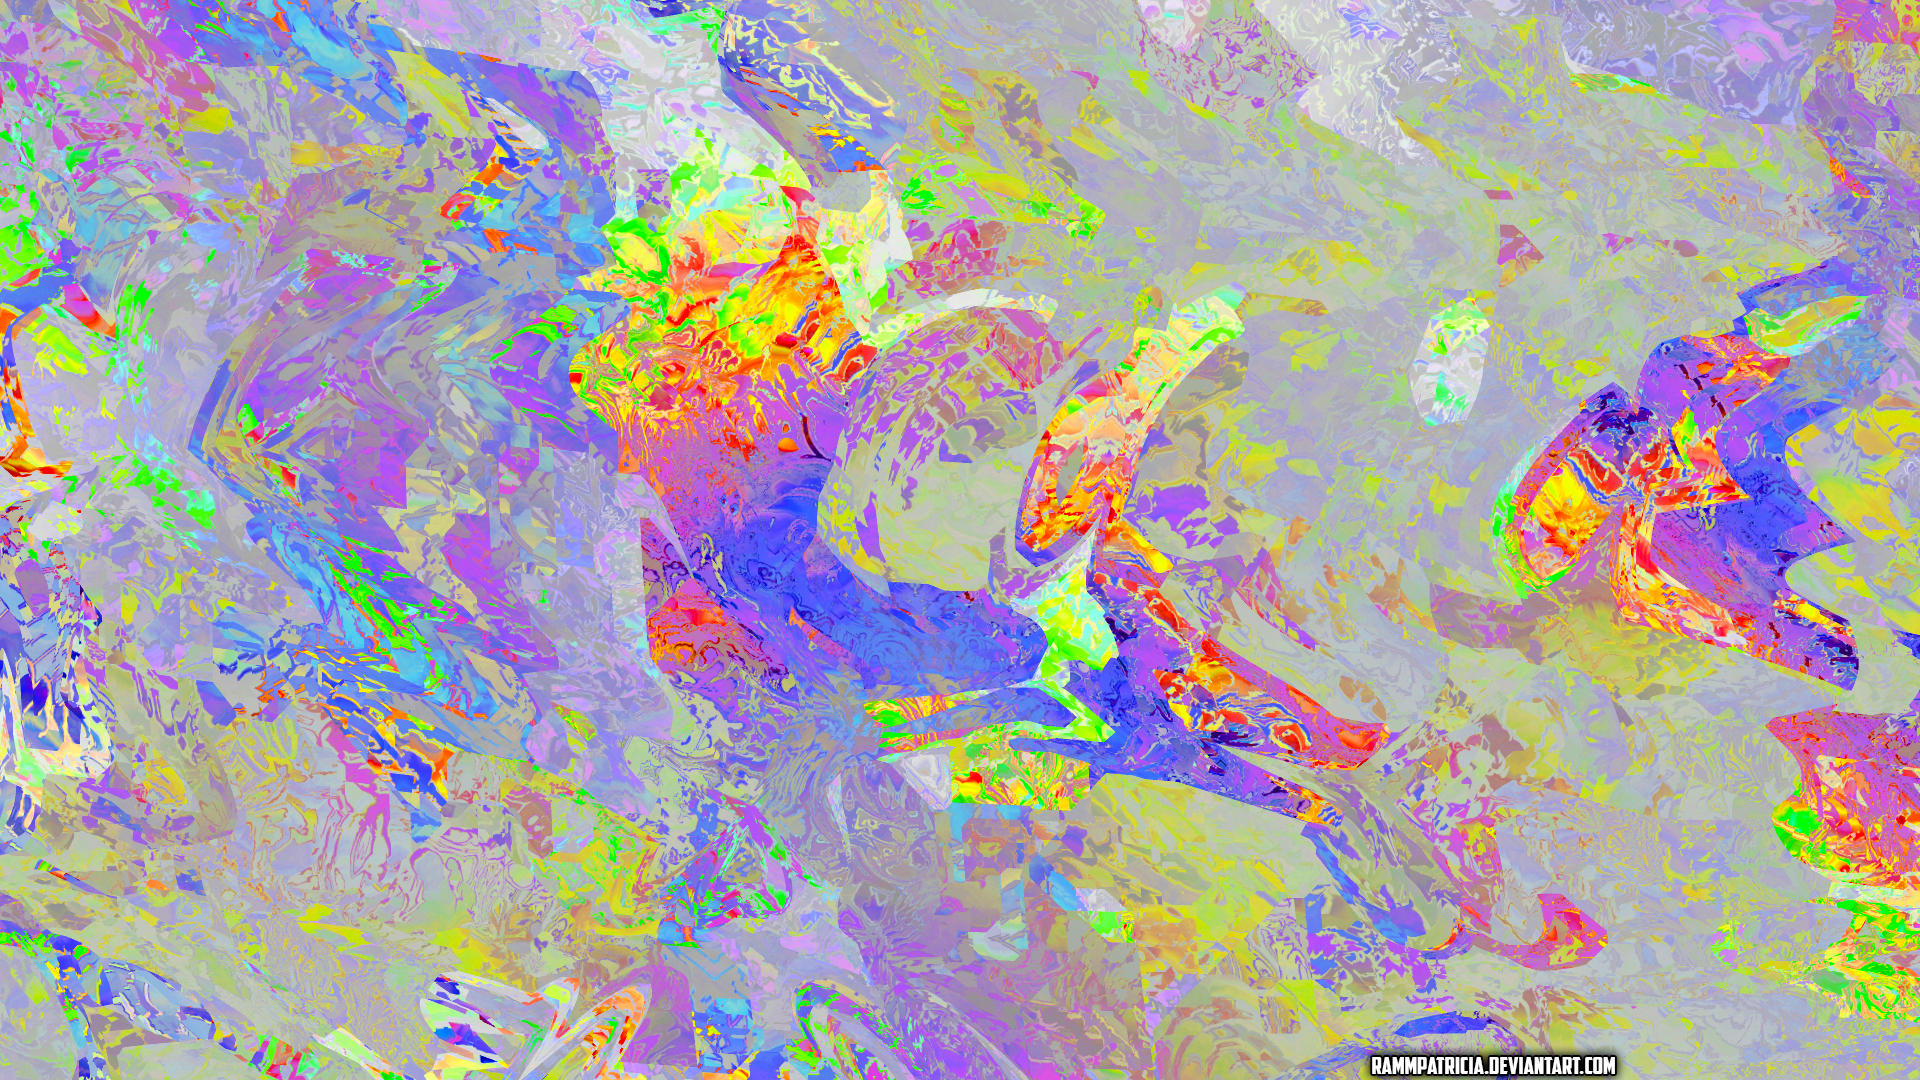 Digital Digital Art RammPatricia Abstract Colorful Iridescent Watermarked 1920x1080